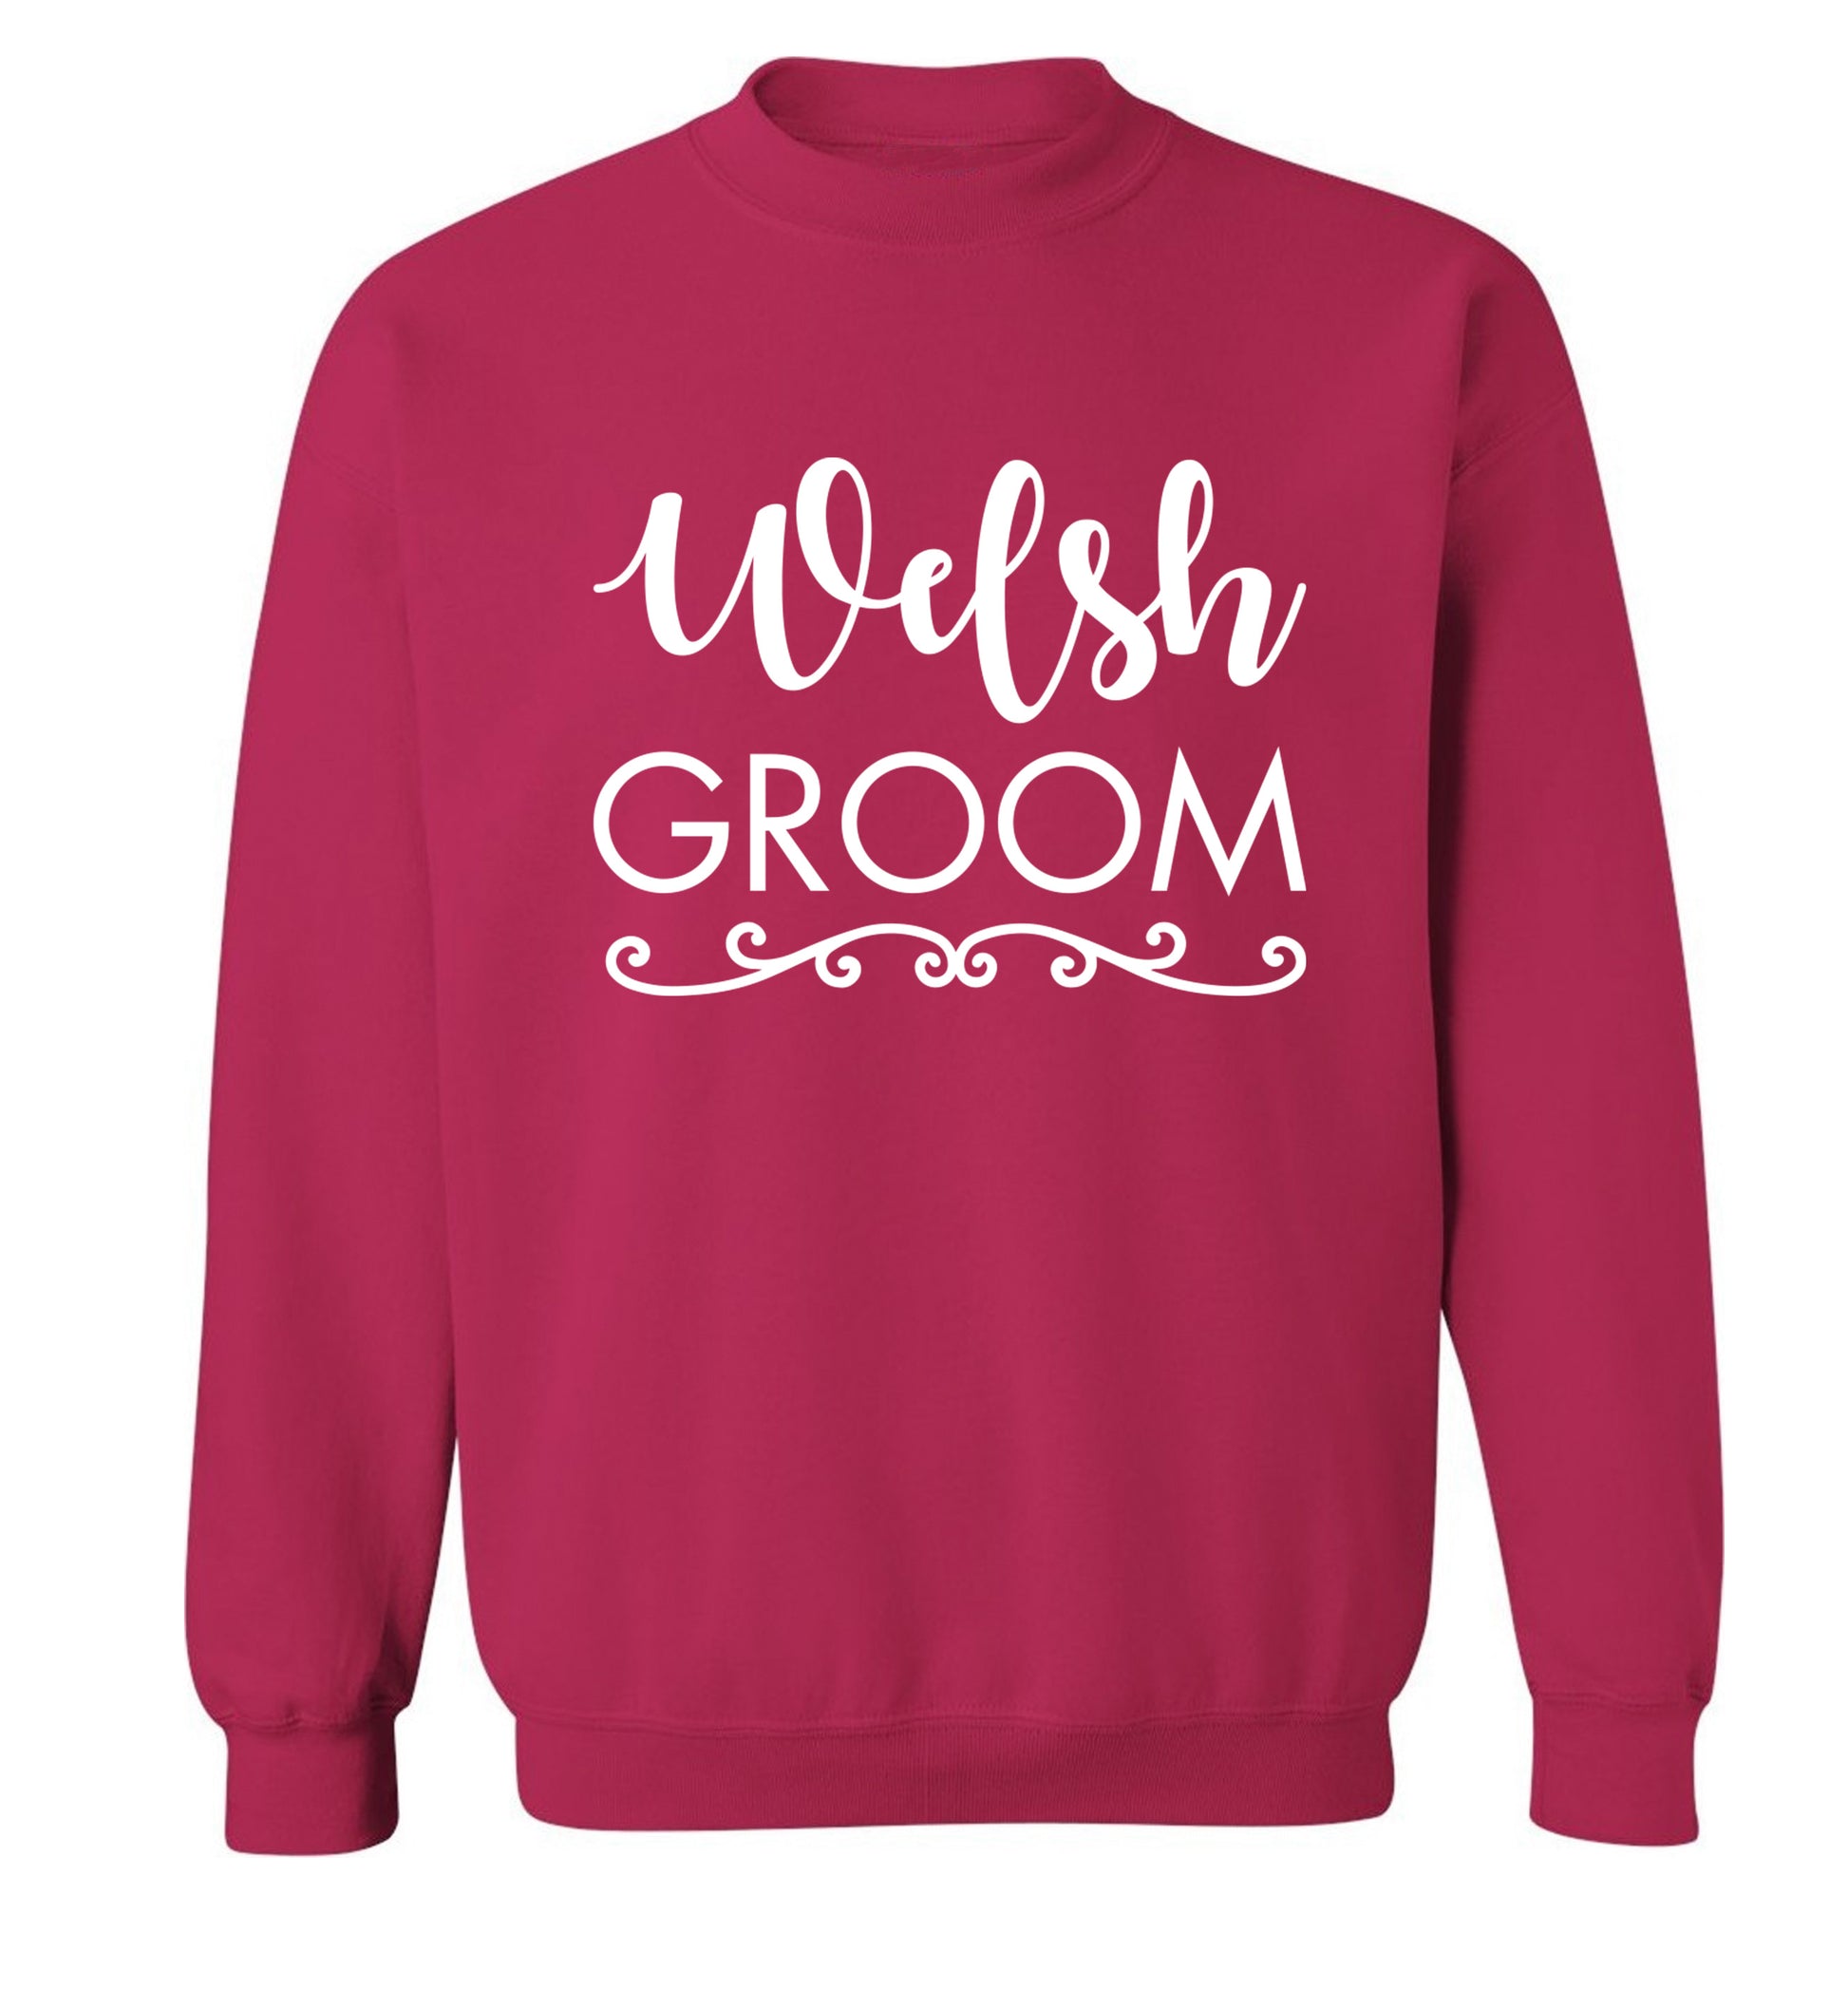 Welsh groom Adult's unisex pink Sweater 2XL